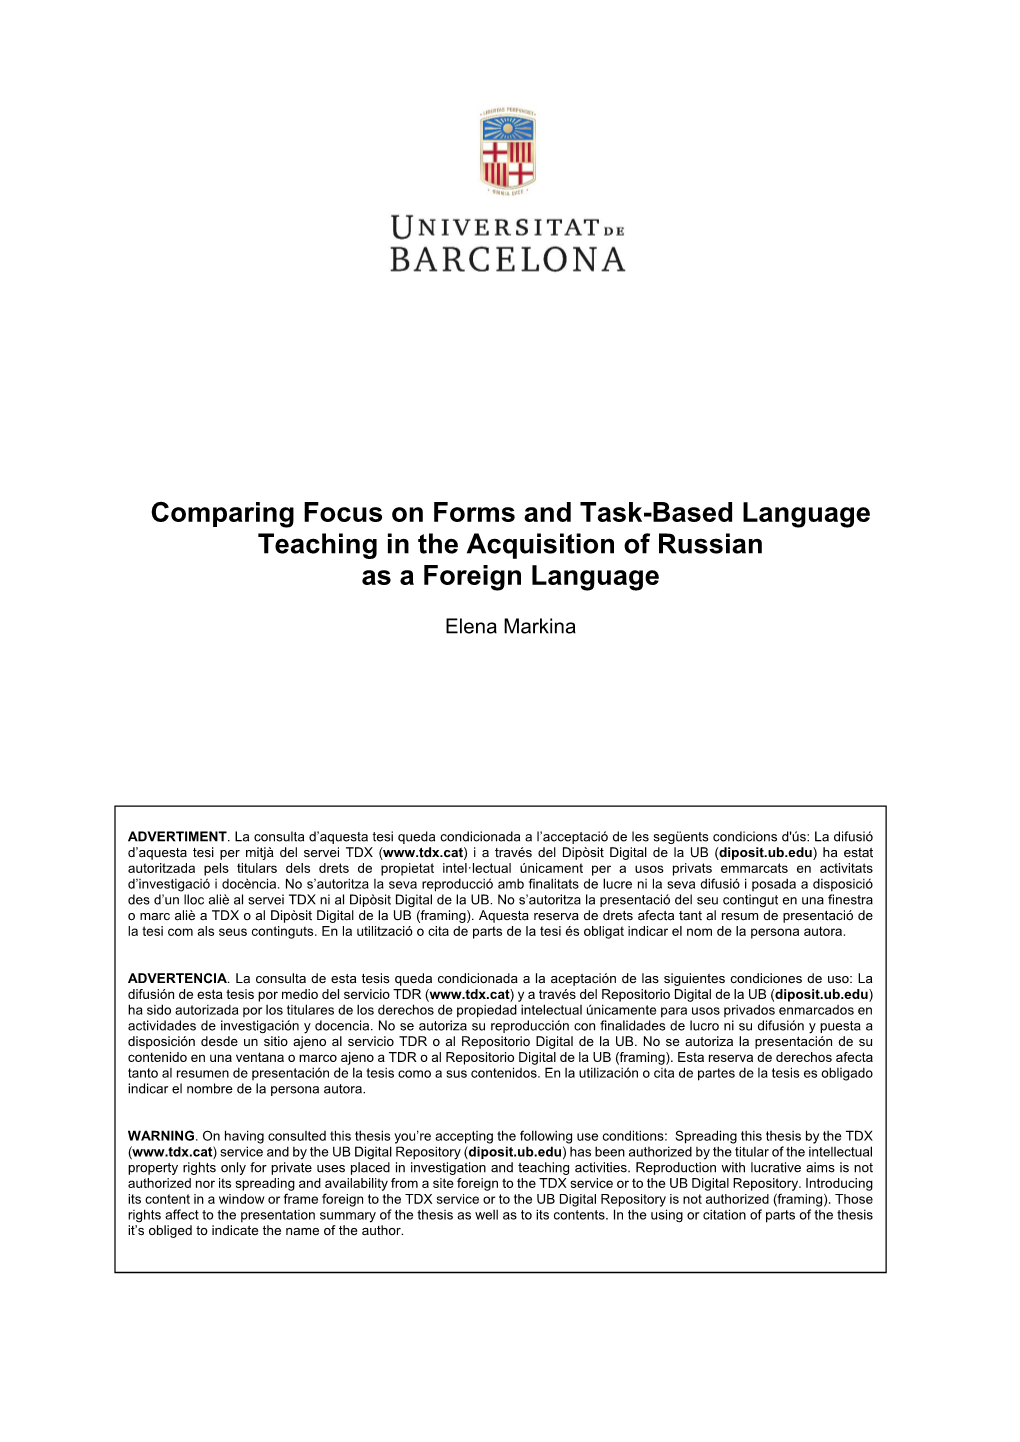 Comparing Focus on Forms and Task-Based Language Teaching in the Acquisition of Russian As a Foreign Language